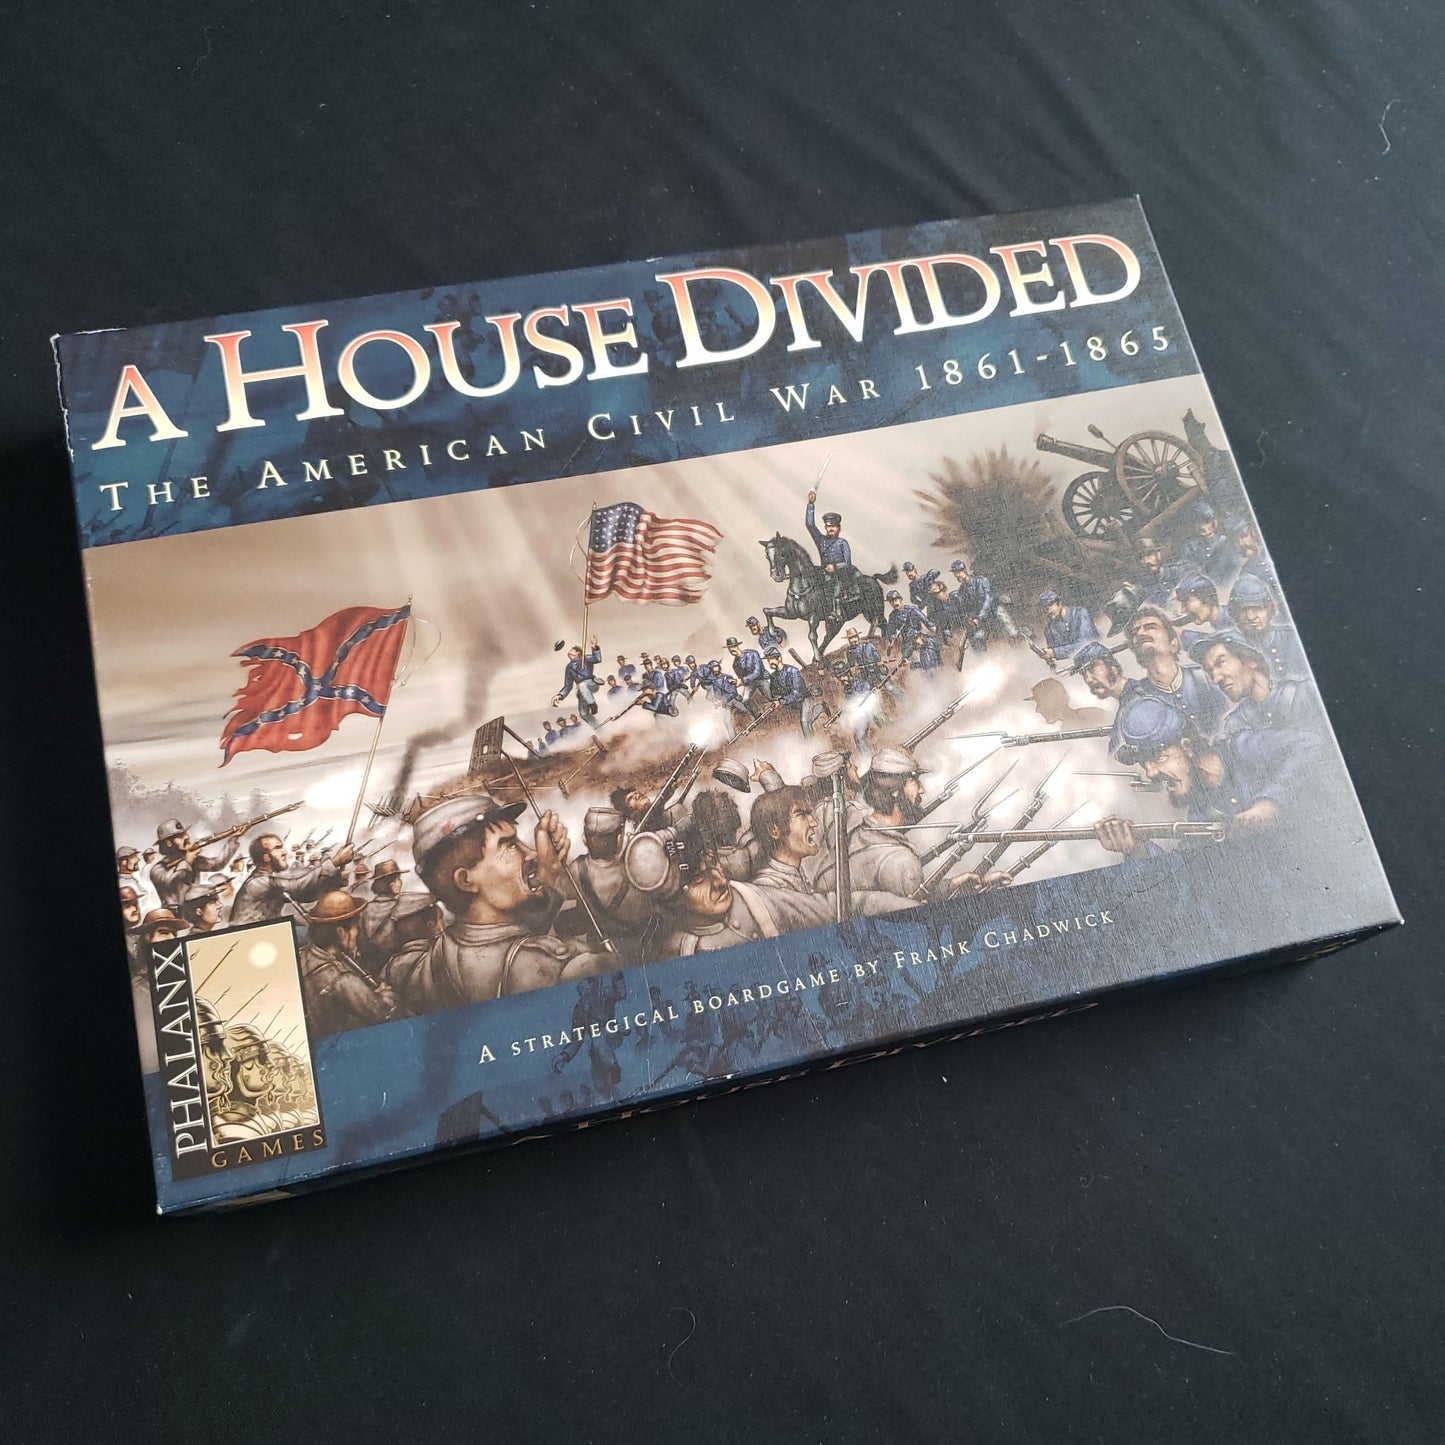 Image shows the front cover of the box of the A House Divided board game